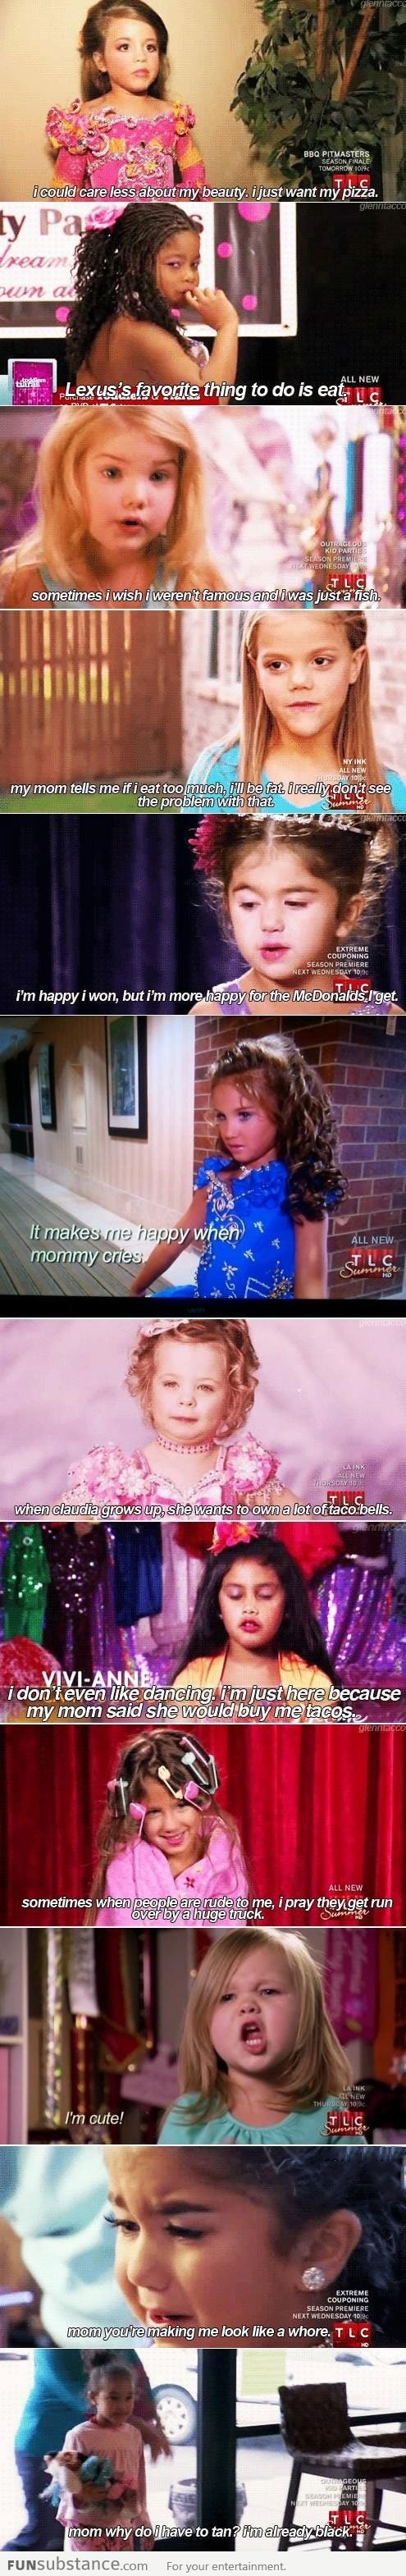 Girls from Toddlers and Tiaras telling the truth...